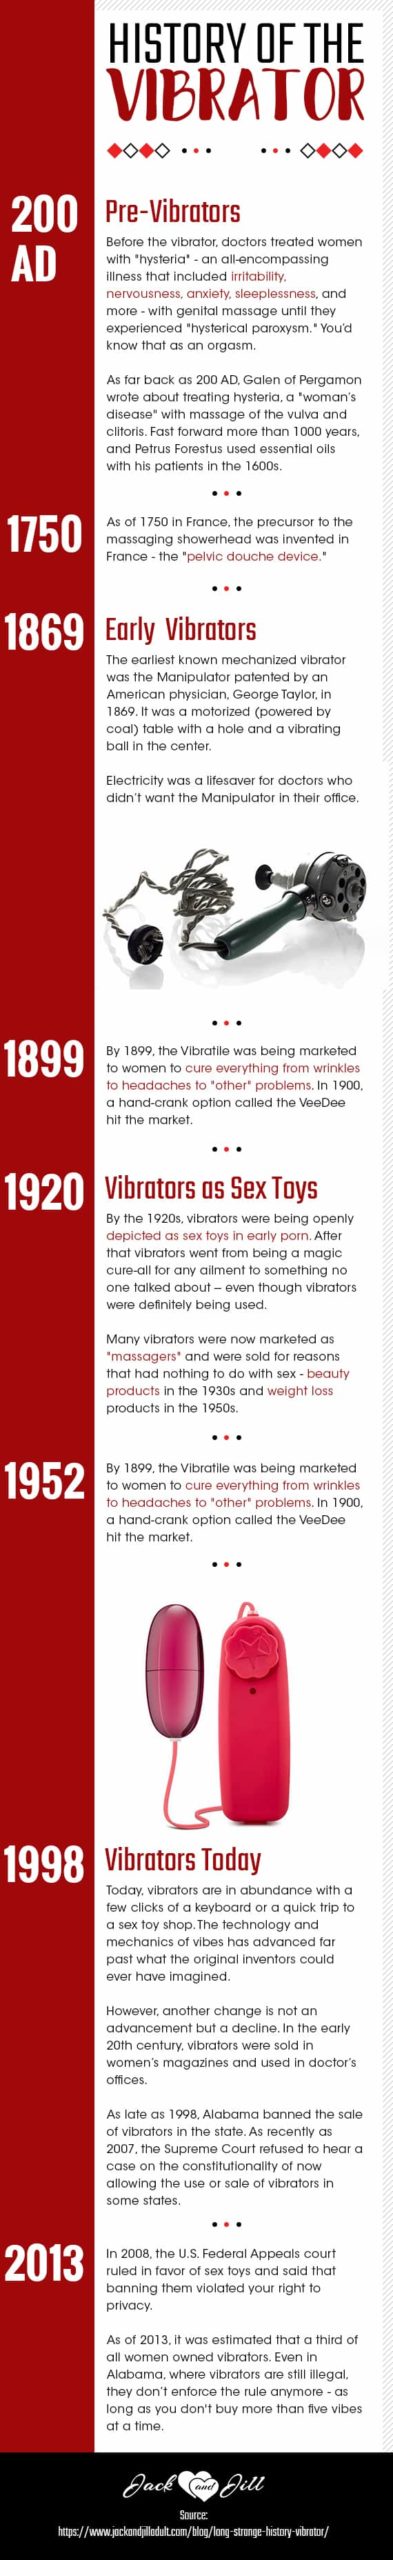 Infographic for The History of the Vibrator